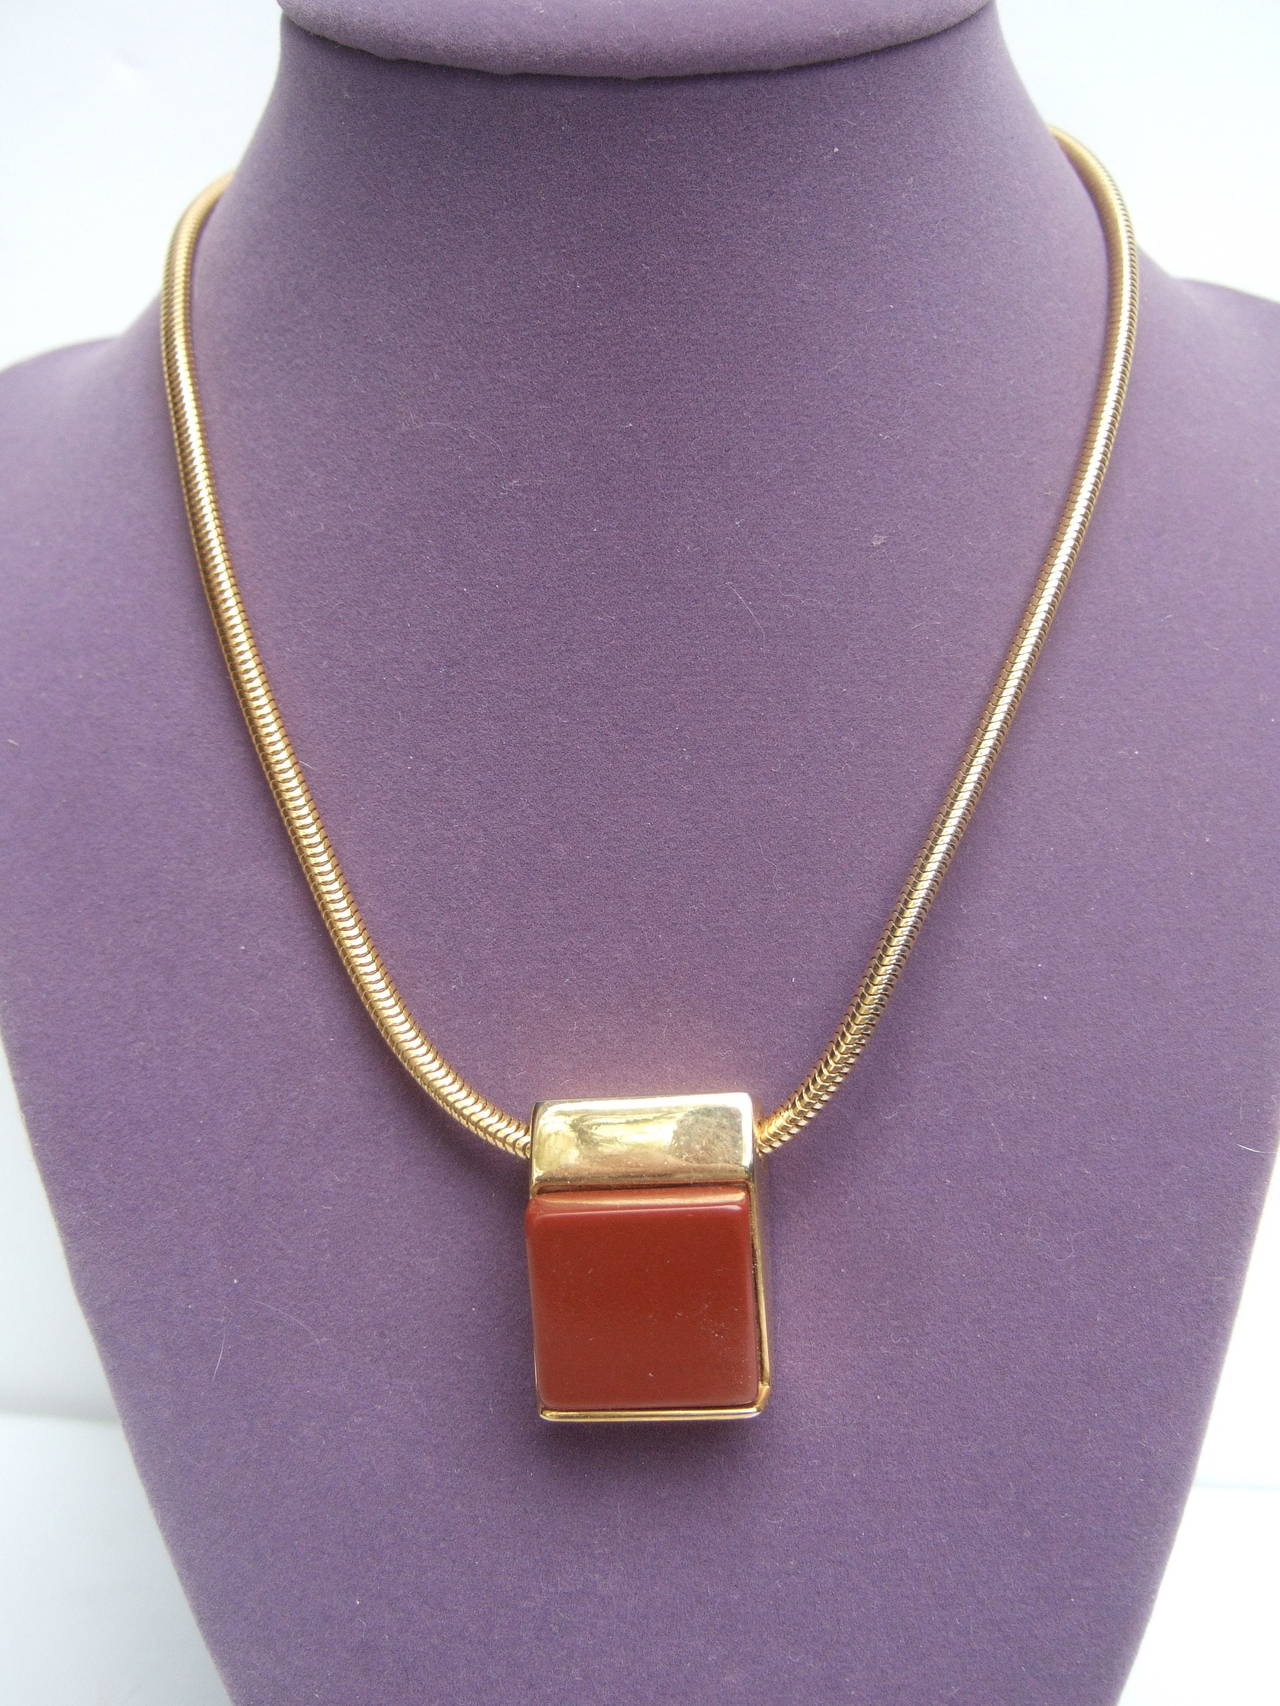 Pierre Cardin Sleek Cinnabar Resin Necklace & Earrings c 1970 In Excellent Condition For Sale In University City, MO